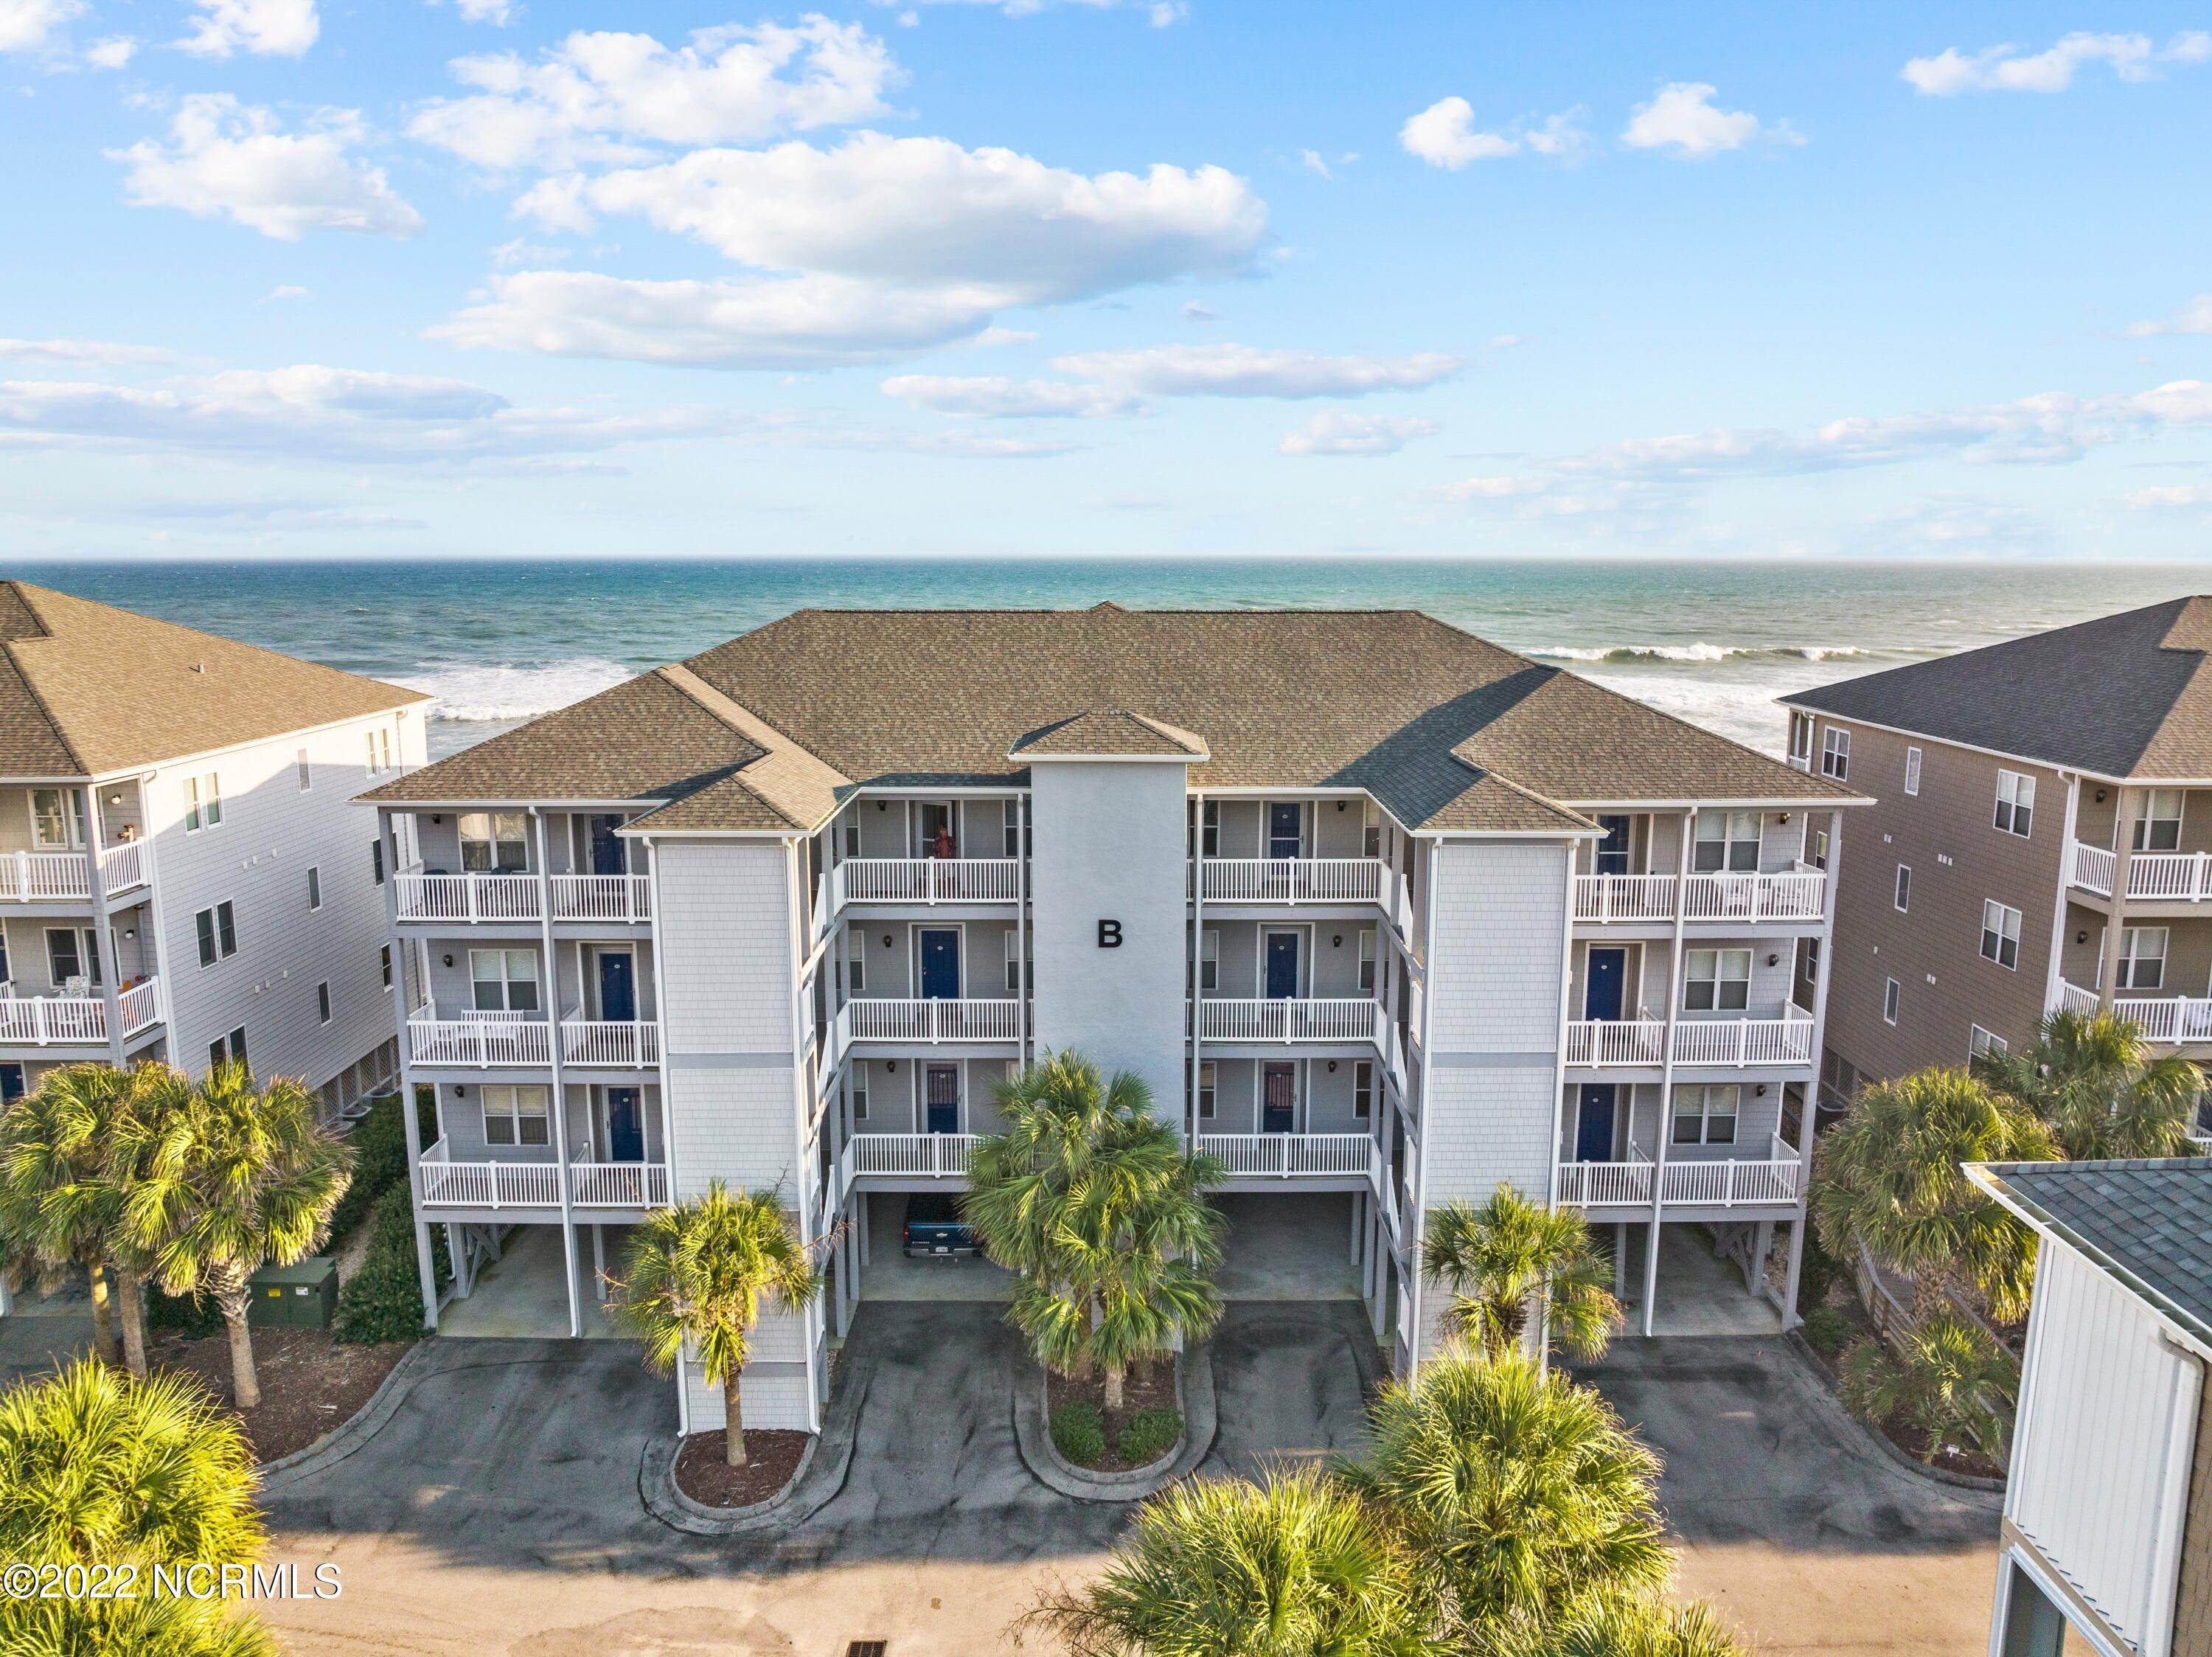 8. Condominiums for Sale at 1701 Salter Path Road Indian Beach, North Carolina 28512 United States